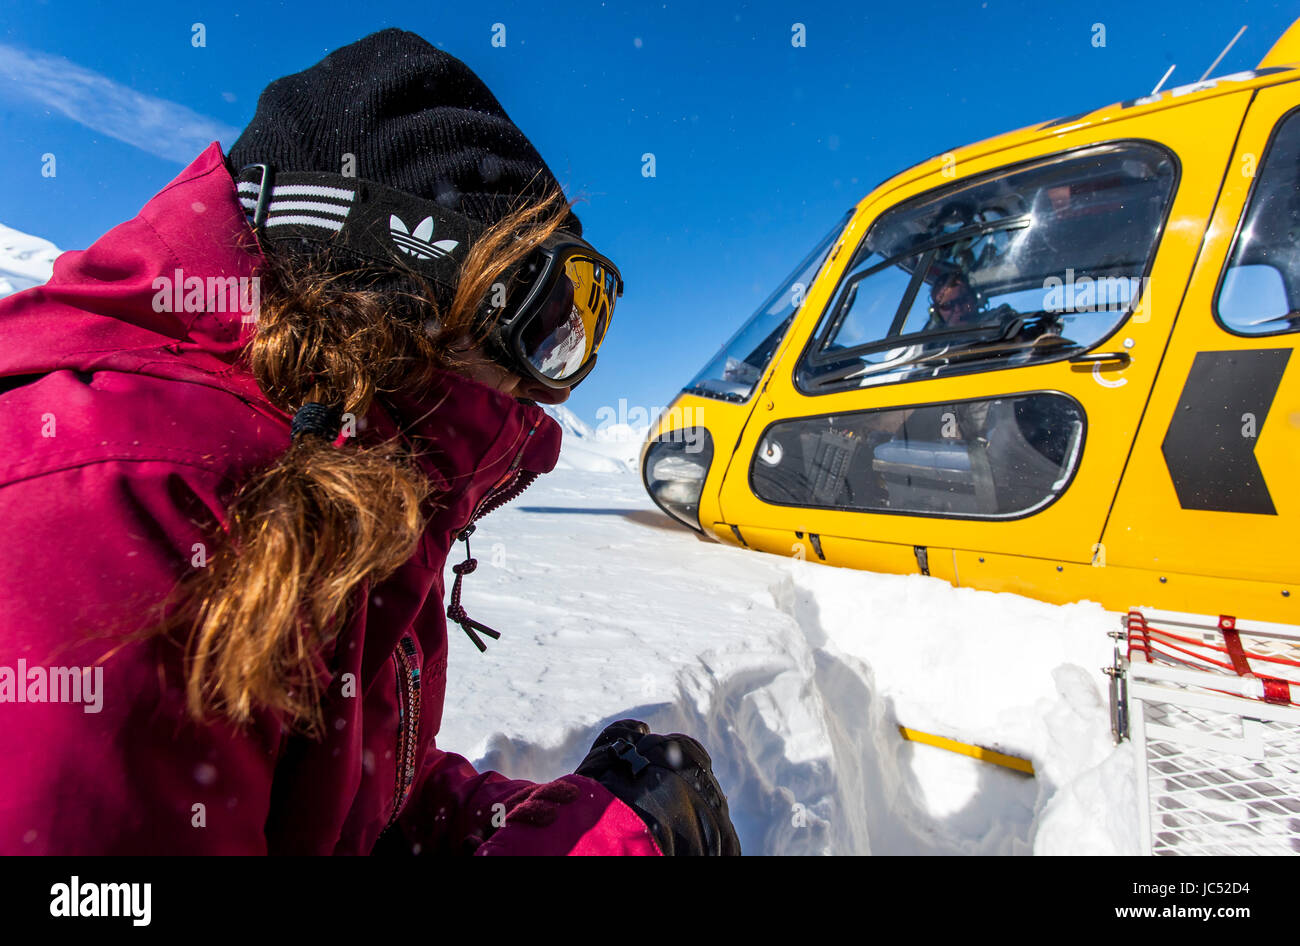 Professional snowboarder Helen Schettini crouches down as a helicopter takes off next to her on a sunny blue bird day in Haines, Alaska. Stock Photo